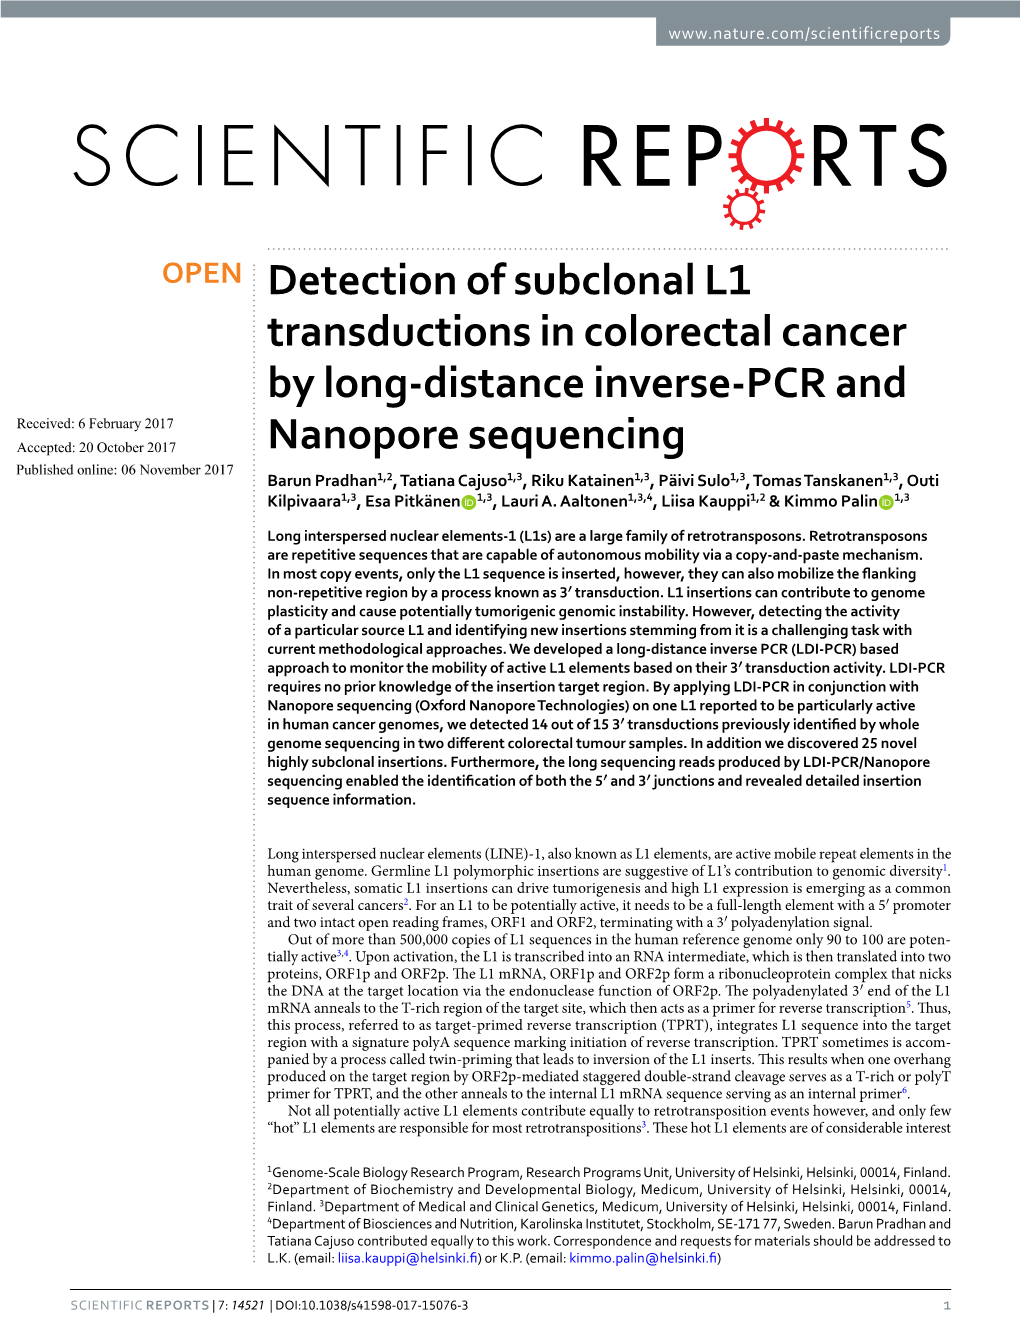 Detection of Subclonal L1 Transductions in Colorectal Cancer